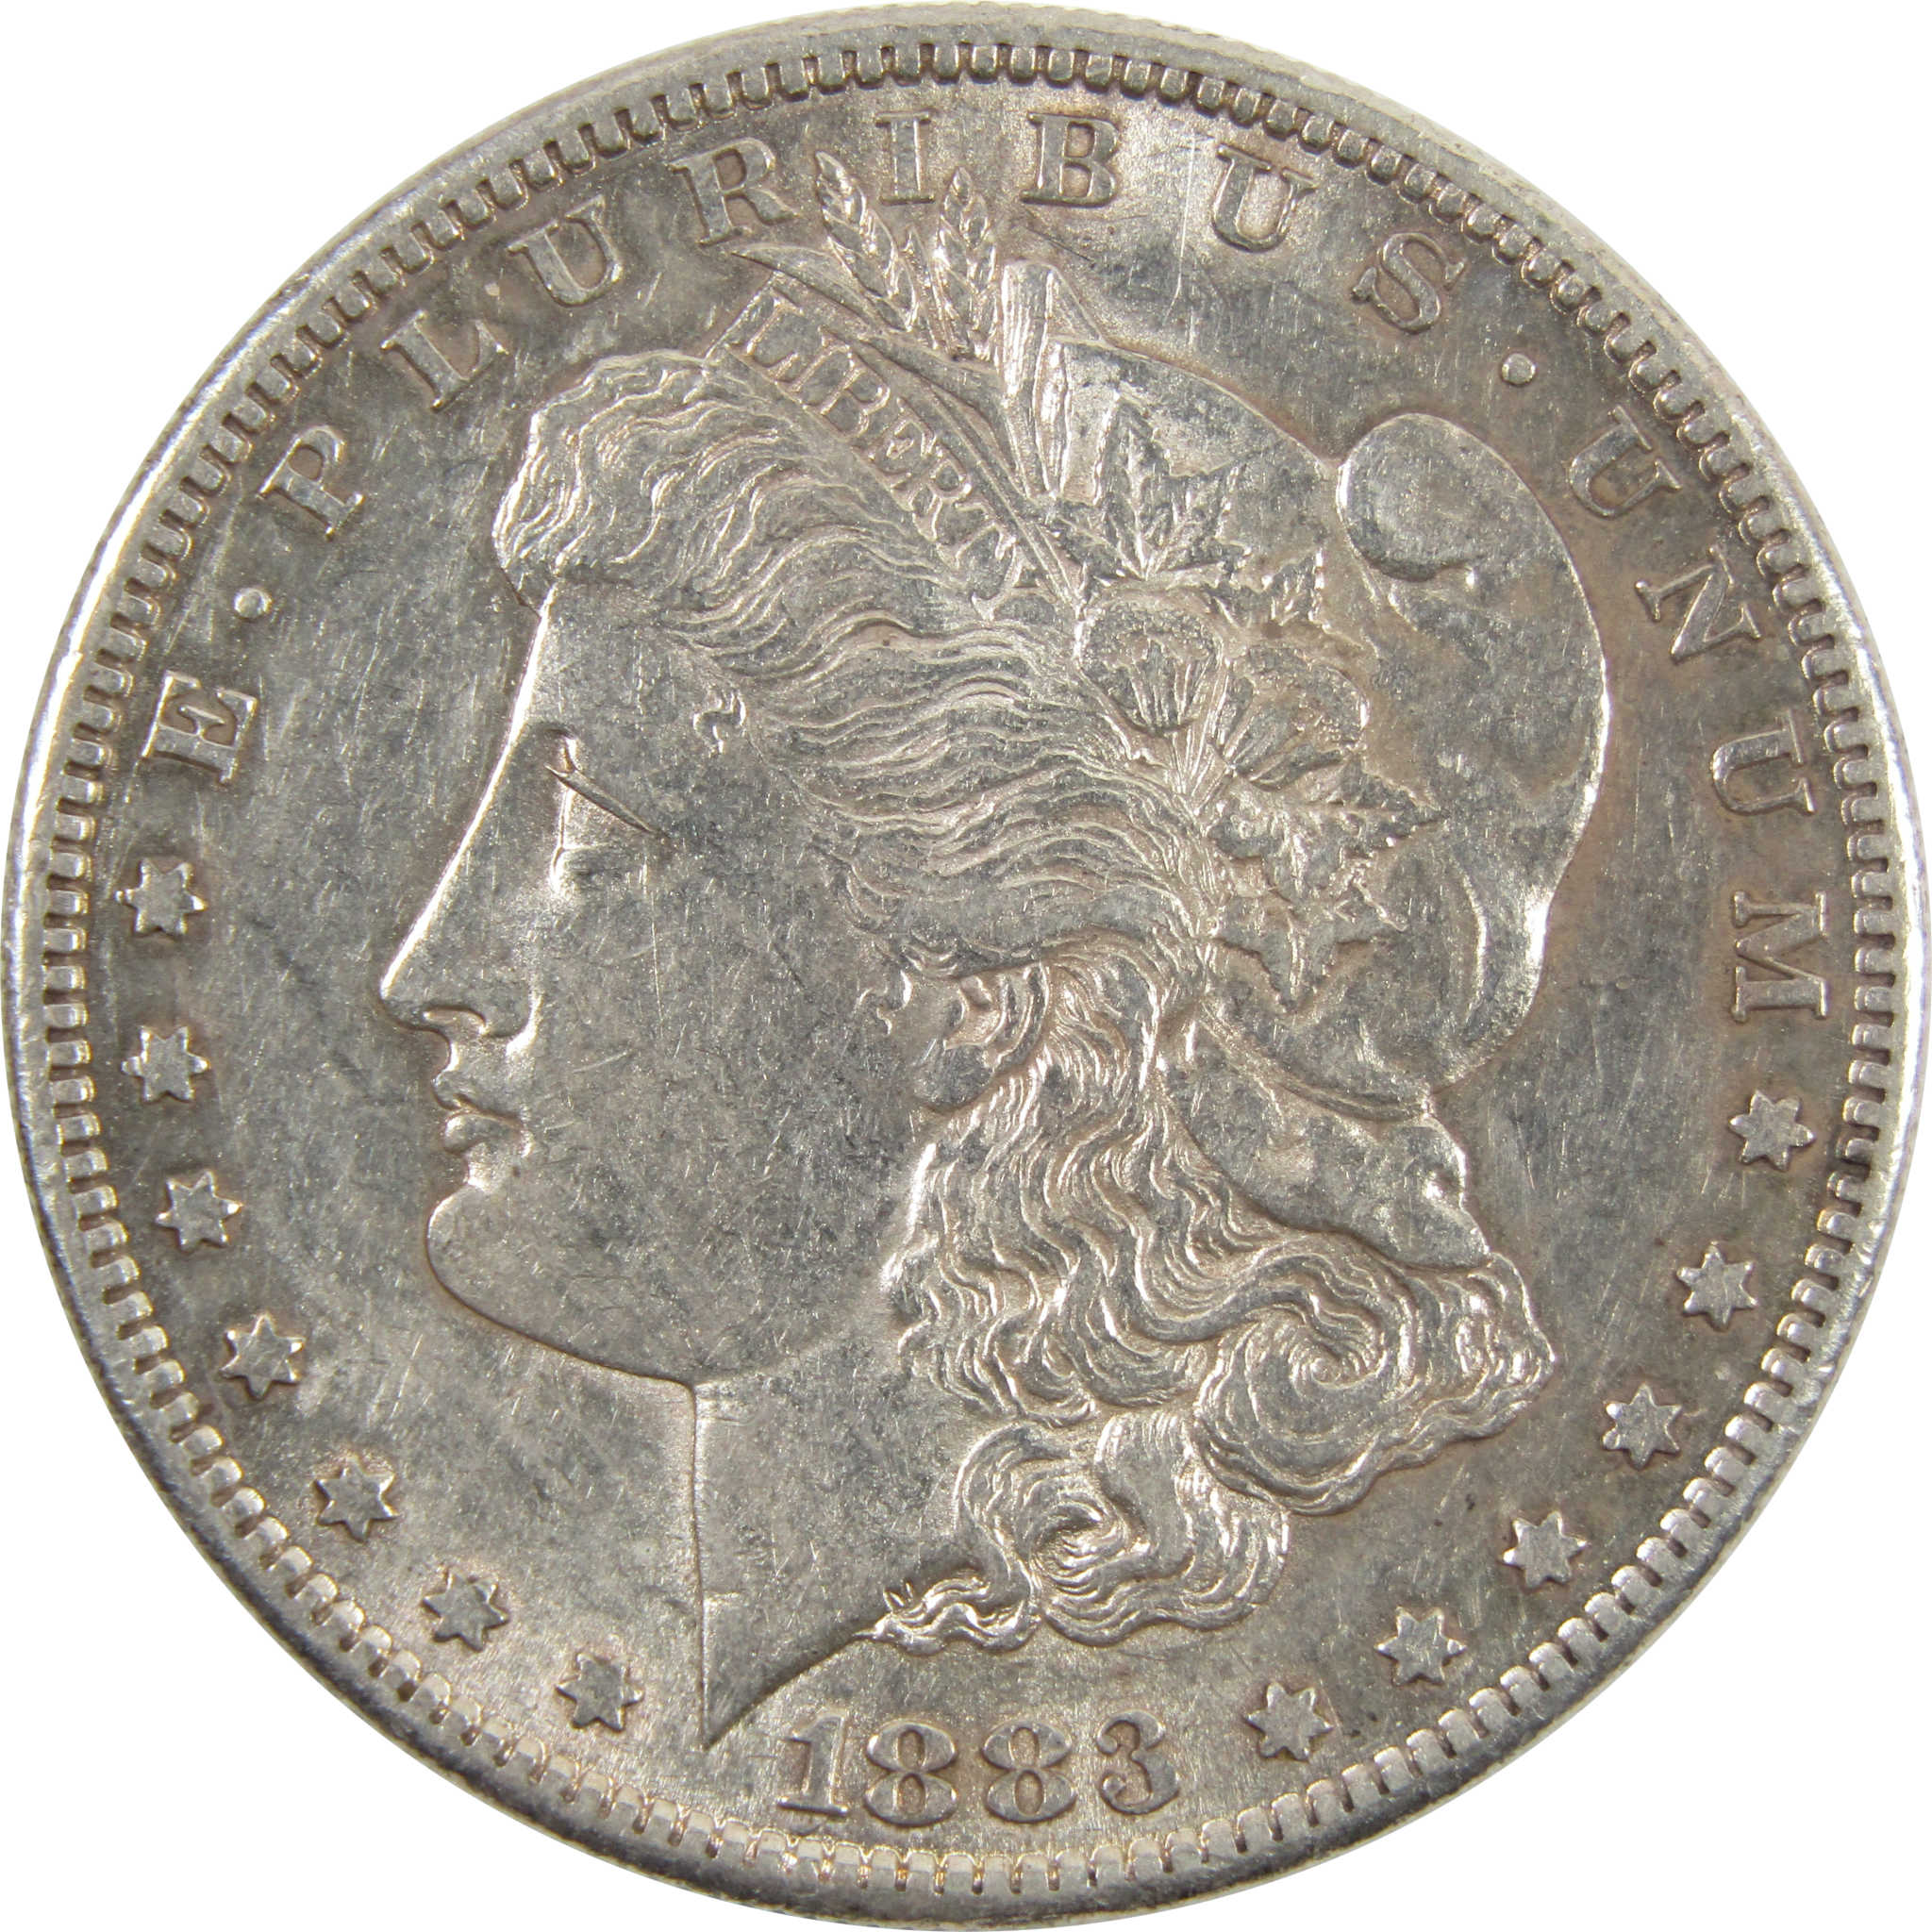 1883 S Morgan Dollar AU About Uncirculated Details SKU:I11215 - Morgan coin - Morgan silver dollar - Morgan silver dollar for sale - Profile Coins &amp; Collectibles